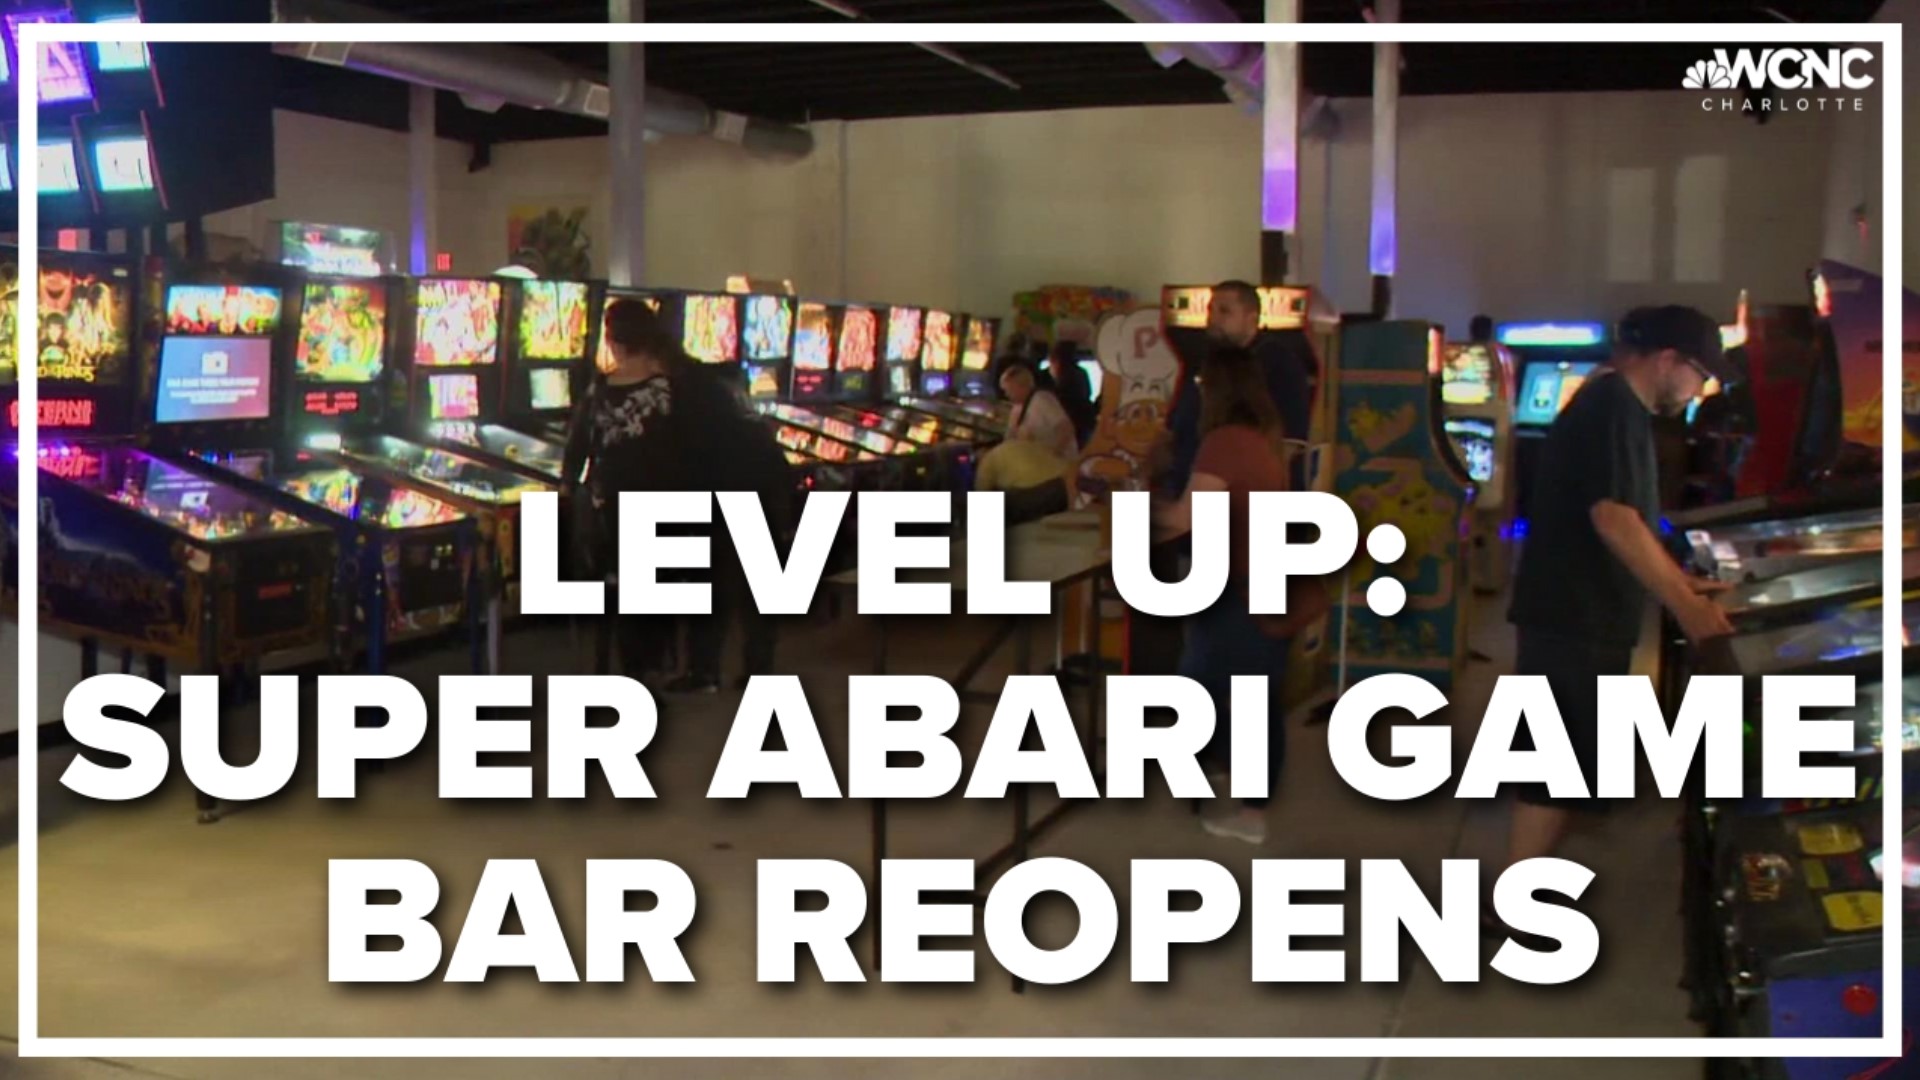 In the case of Super Abari Game Bar in Charlotte, a business that once went under is now getting new life.